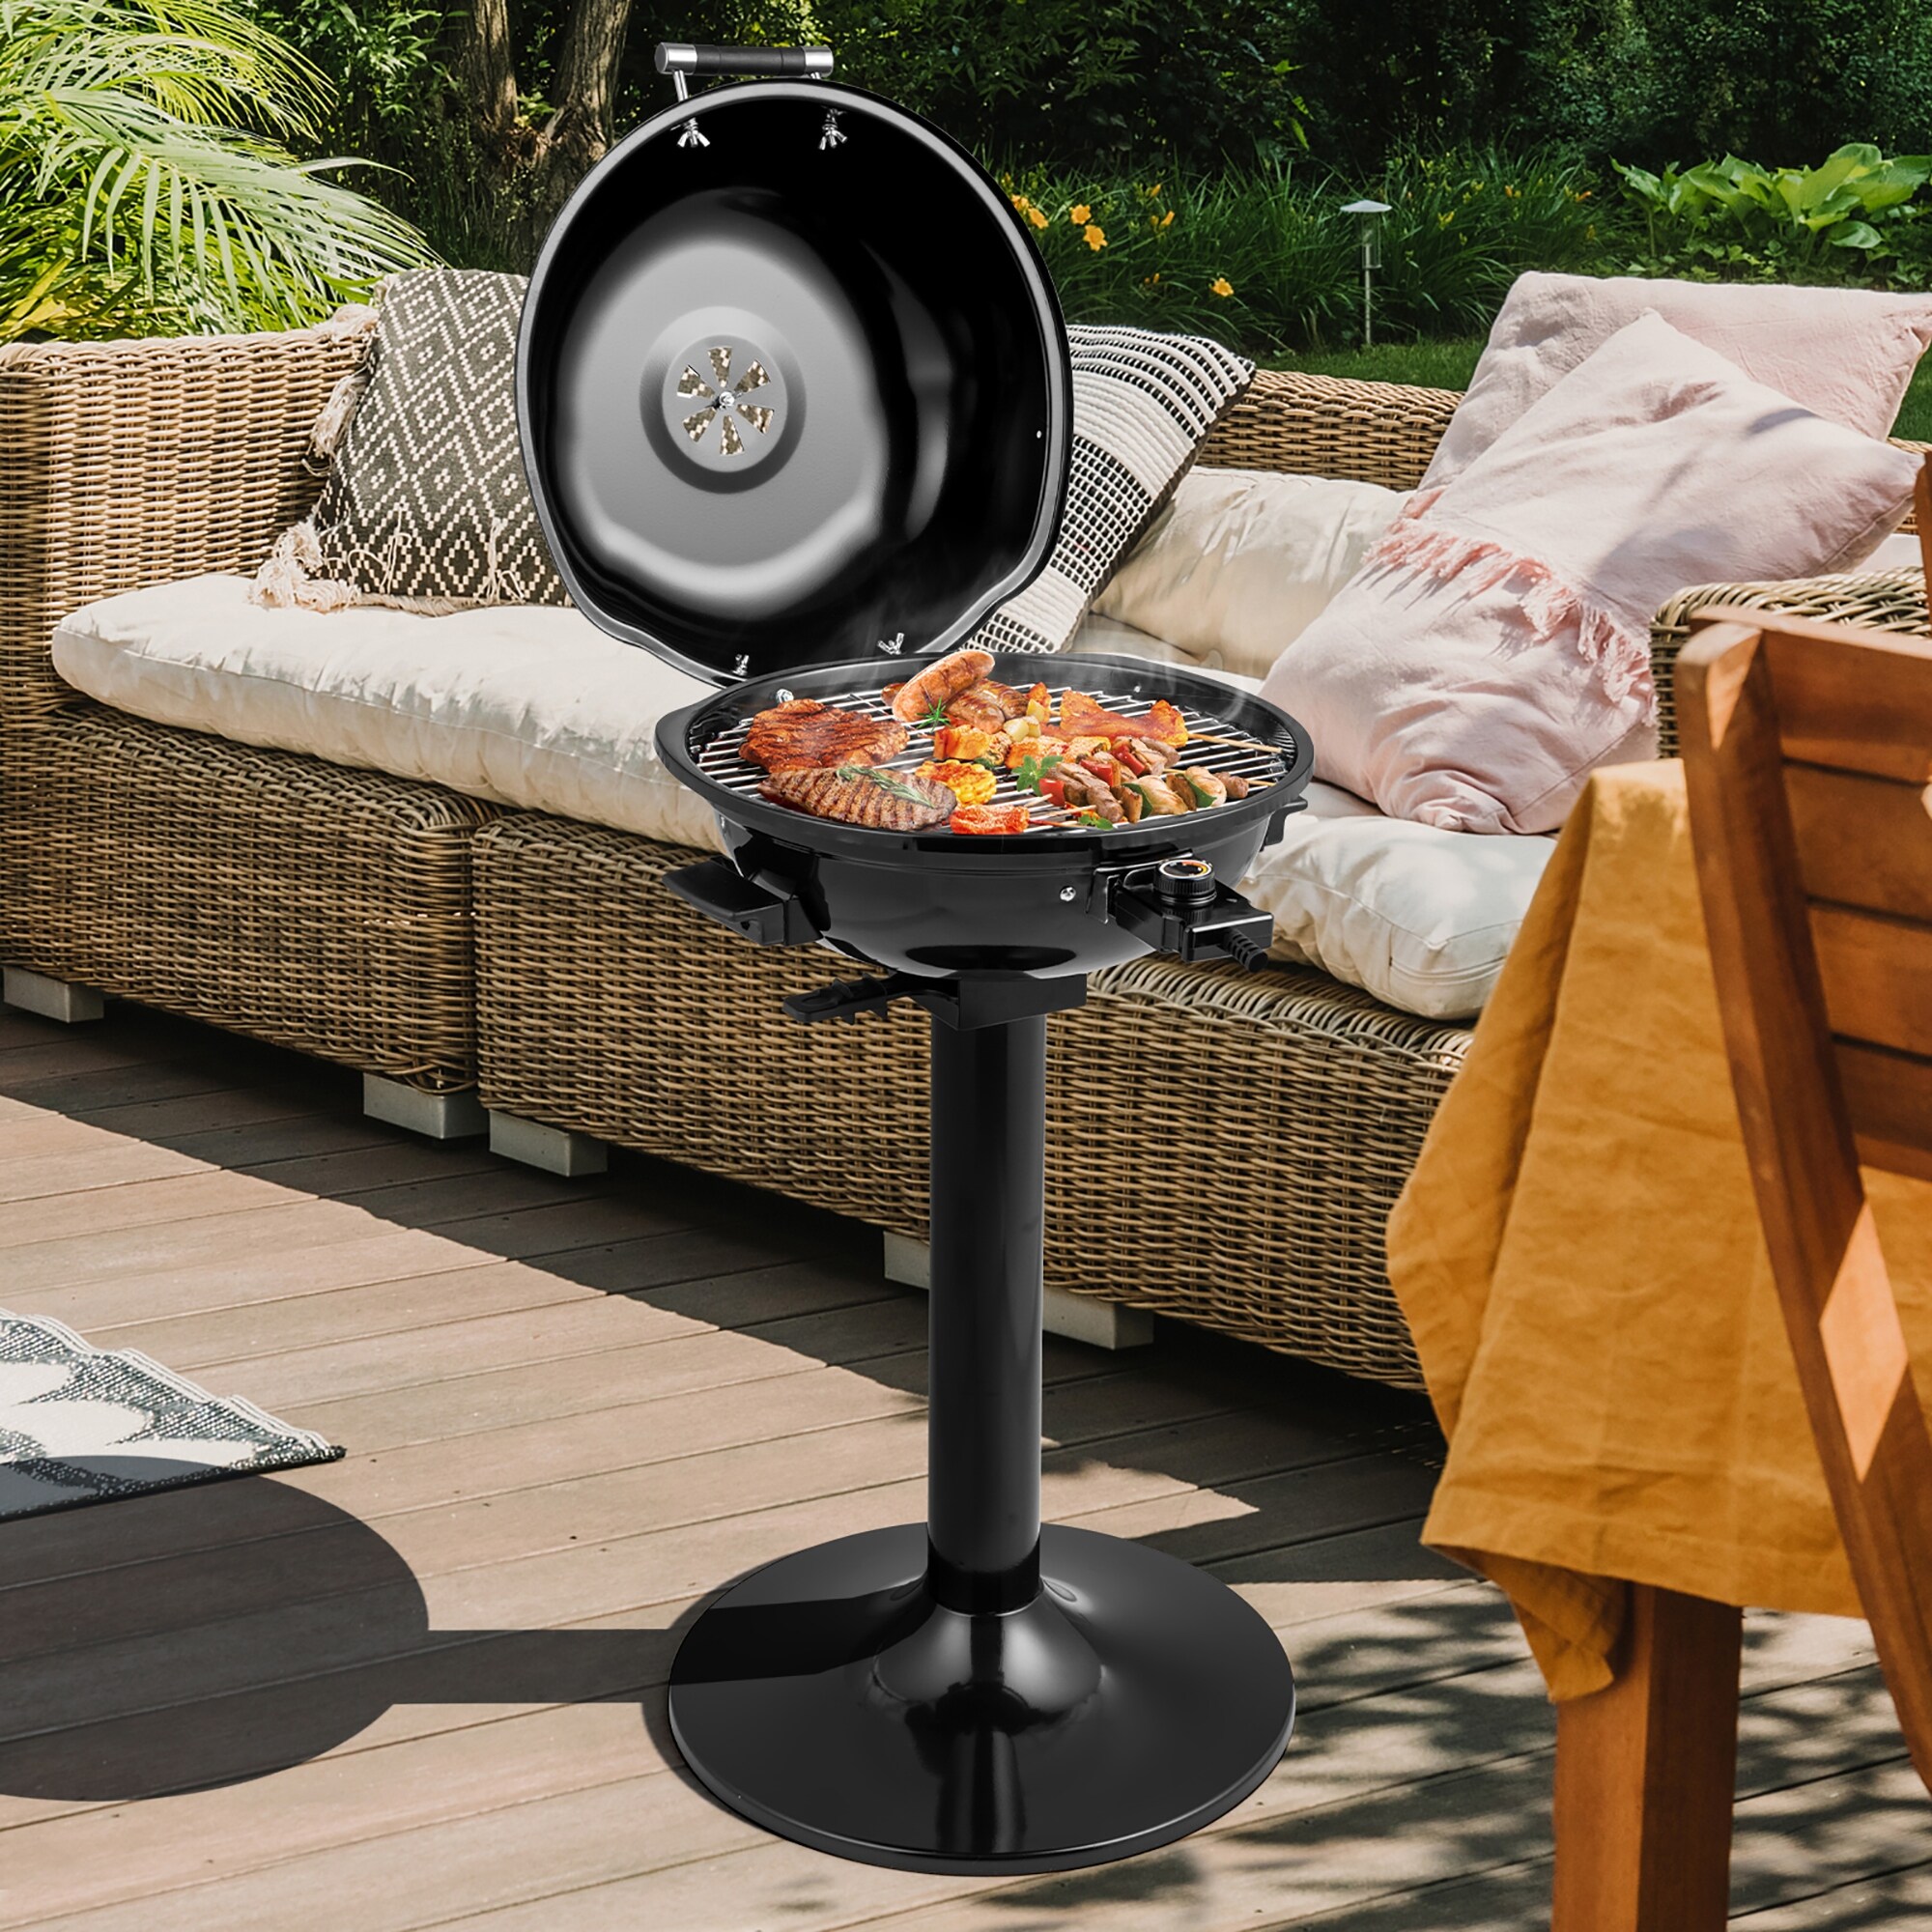 https://ak1.ostkcdn.com/images/products/is/images/direct/57f4e1829094fce49e3b79c98143ed63d478b8d8/1600W-Electric-BBQ-Grill-with-Warming-Rack-Temperature-Control.jpg